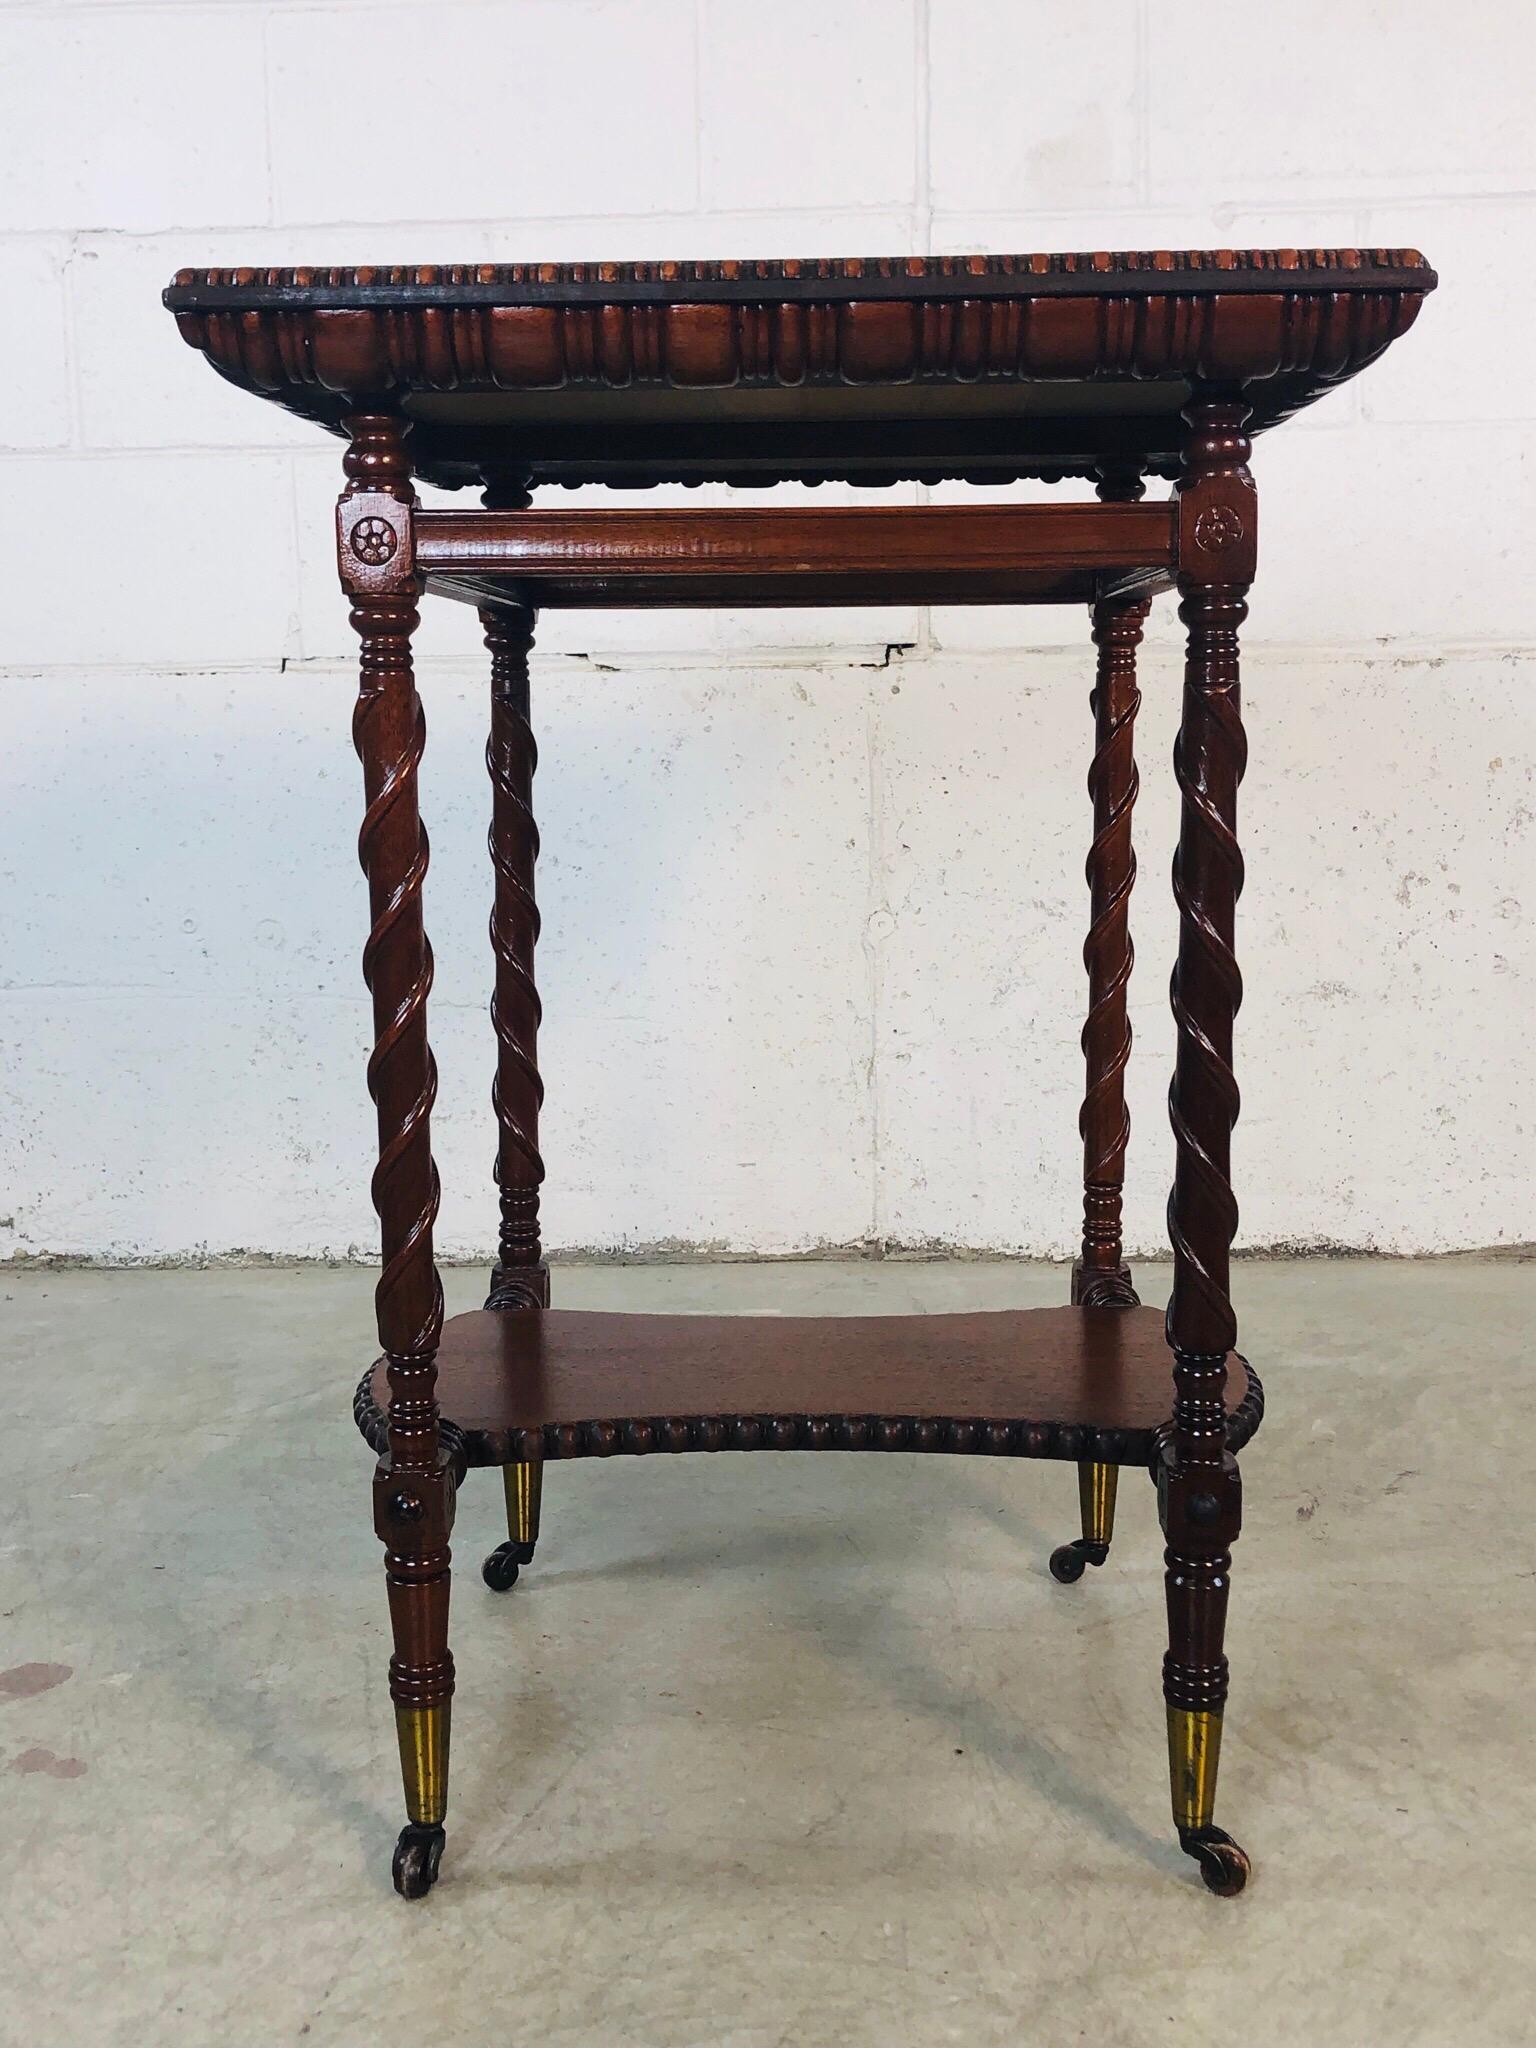 Victorian hand carved square mahogany side table with a rope carved accent. This Victorian table has beautiful hand carved sides and accents on all four sides. The table also has brass feet that roll. The second shelf also has carved balls along all